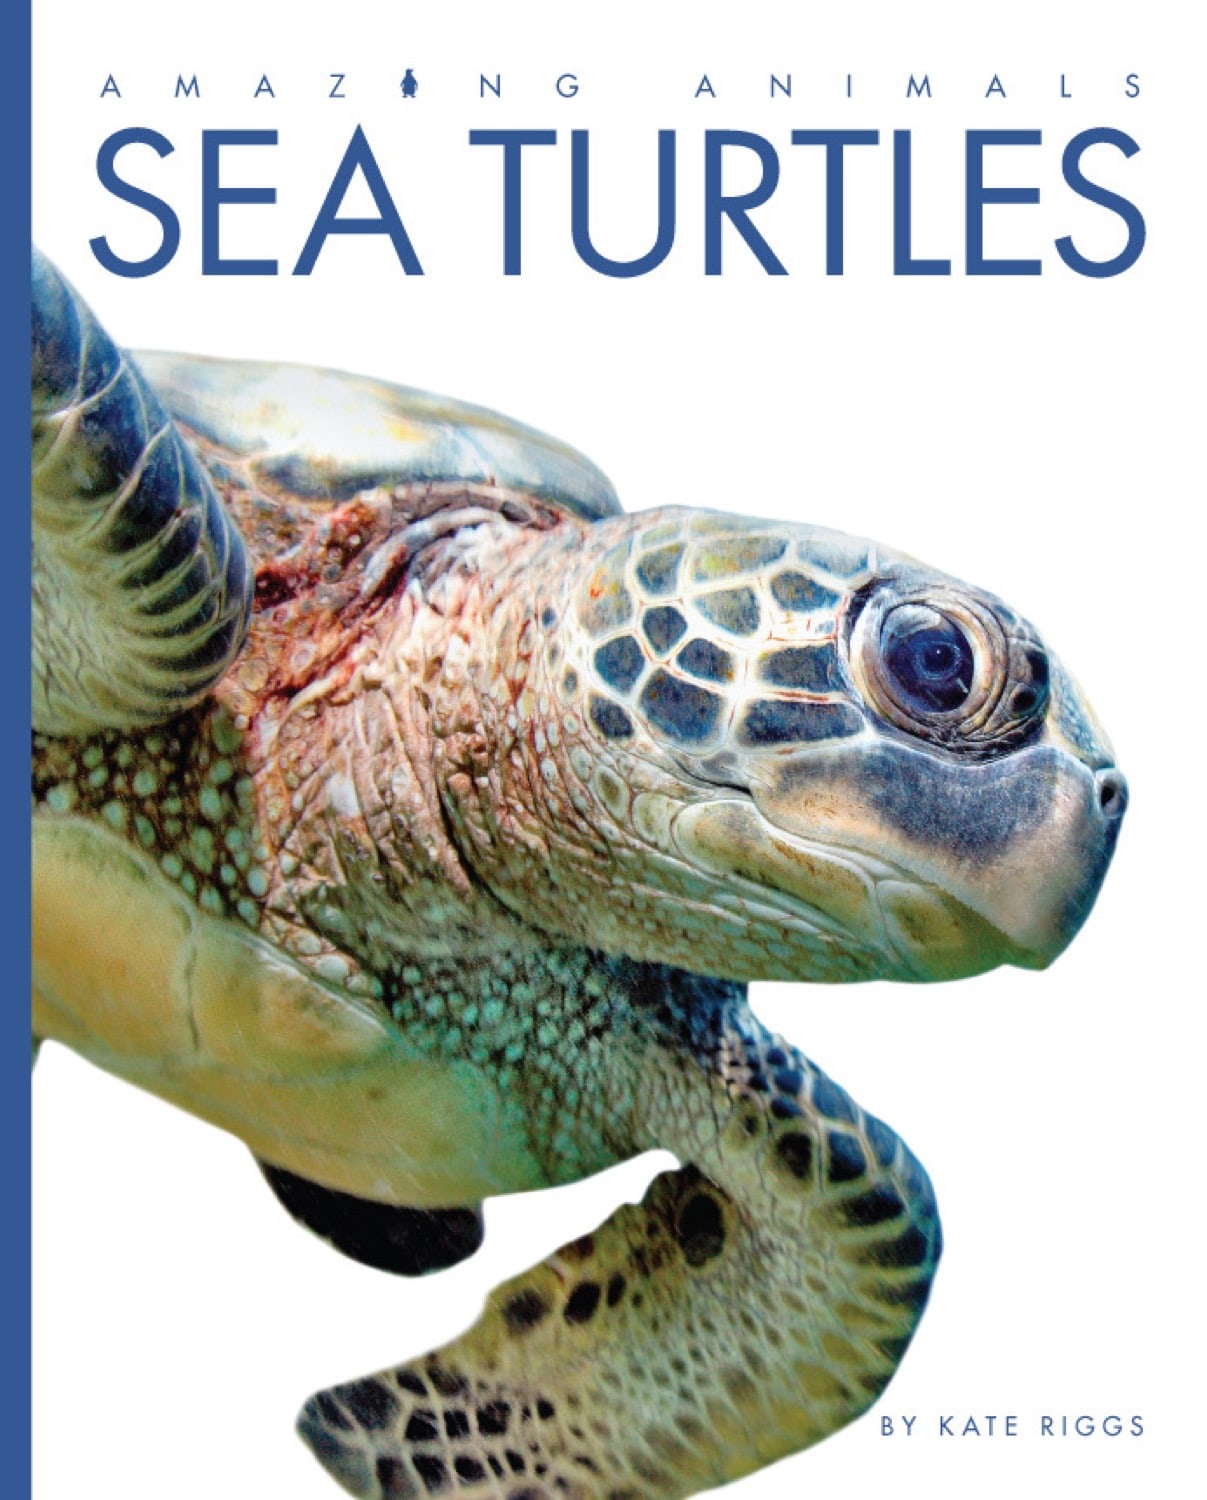 A Book About Sea Turtles